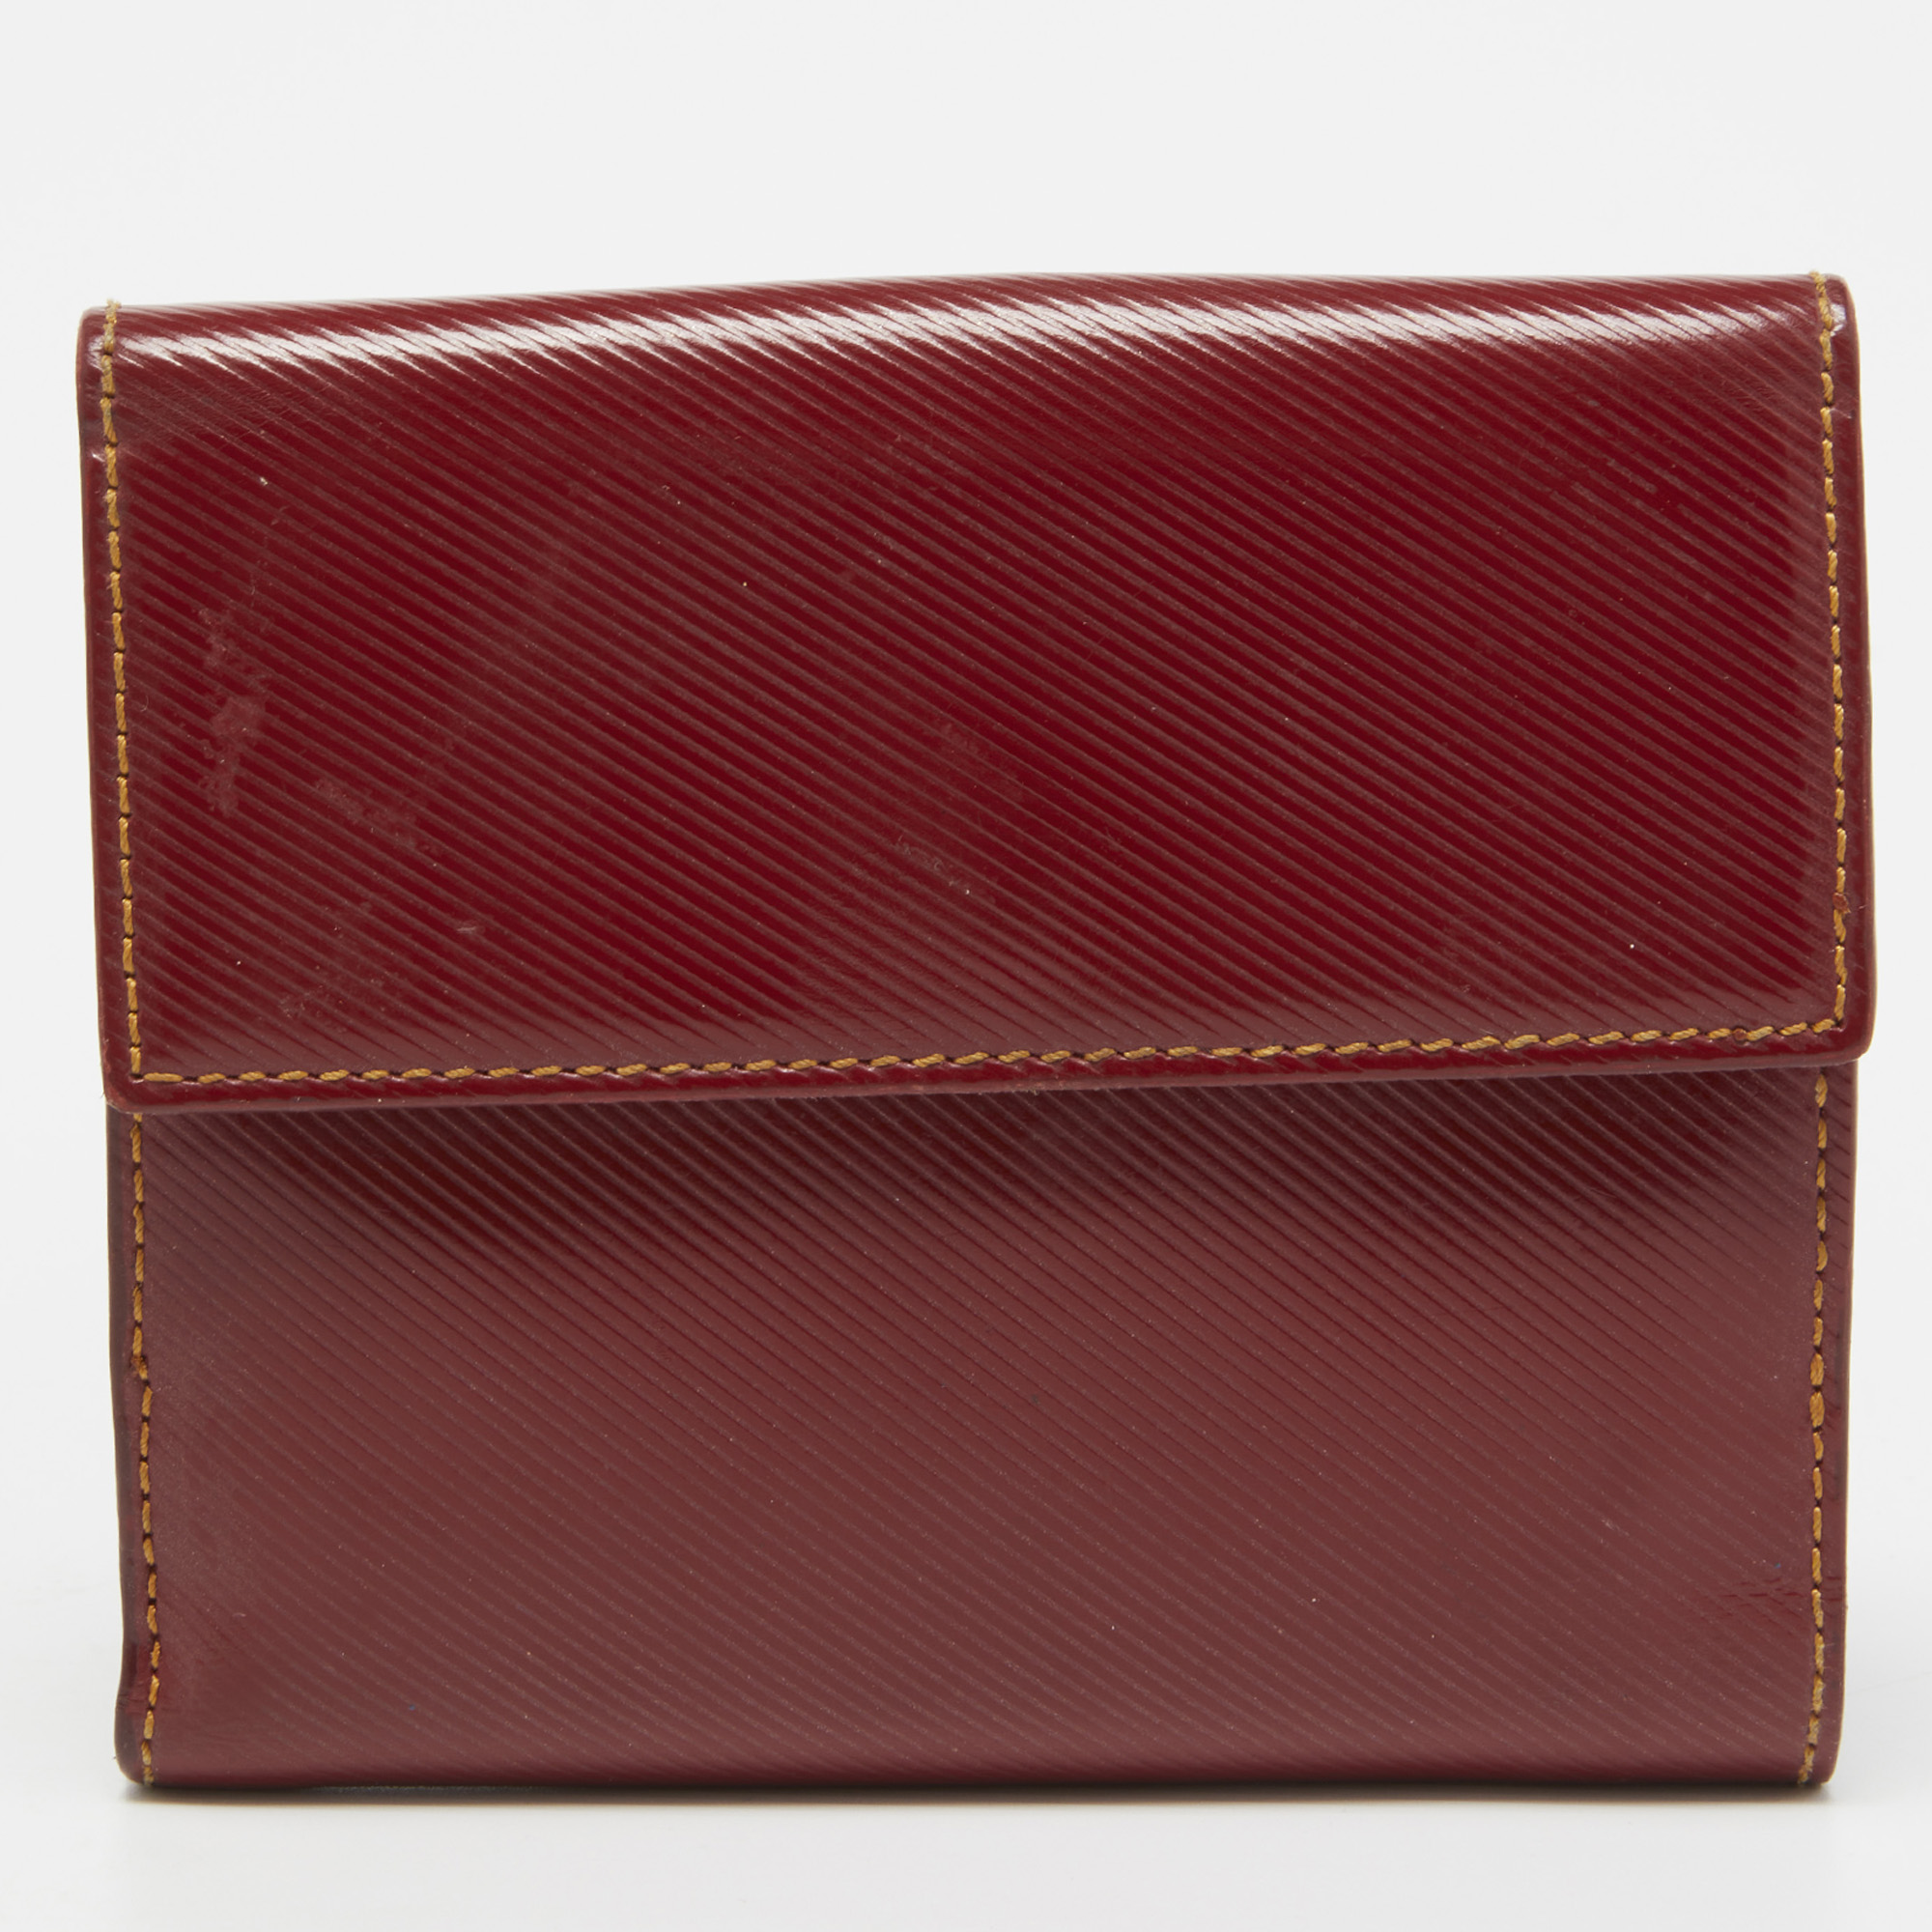 Fendi Red Coated Canvas Compact Flap Wallet